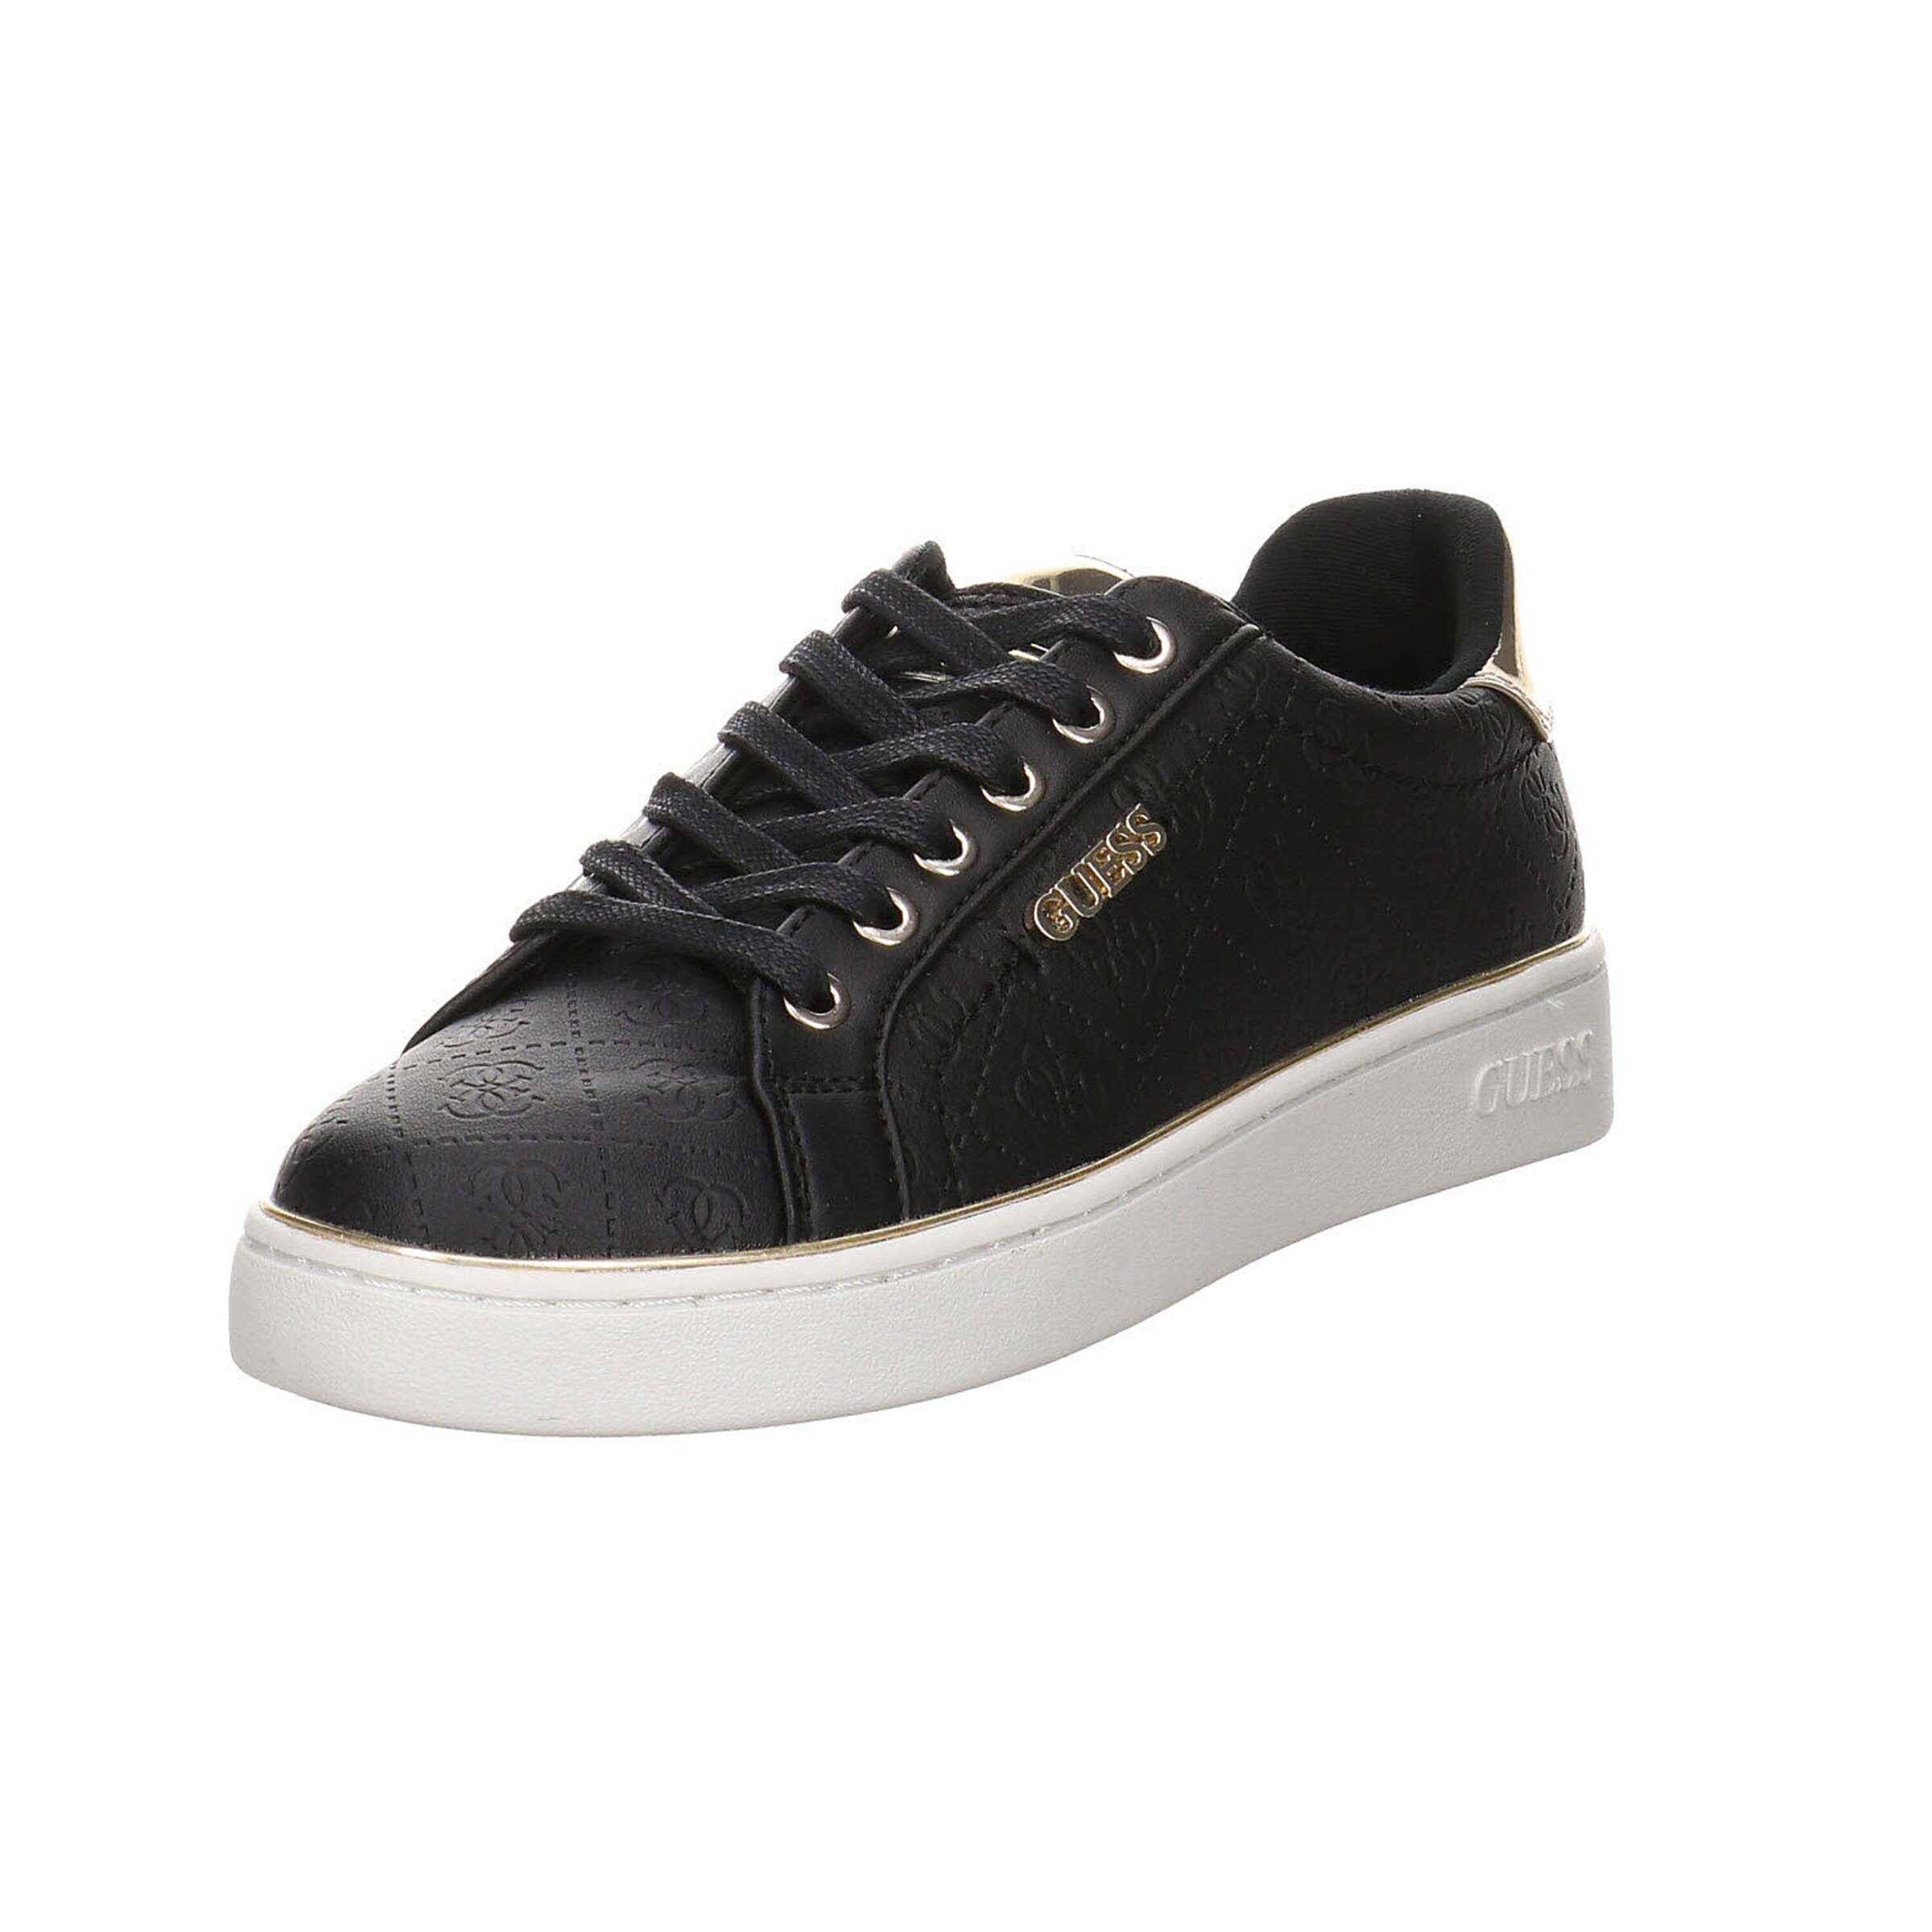 Guess BECKIE/ACTIVE LADY/LEATHER LIK Sneaker (1-tlg)